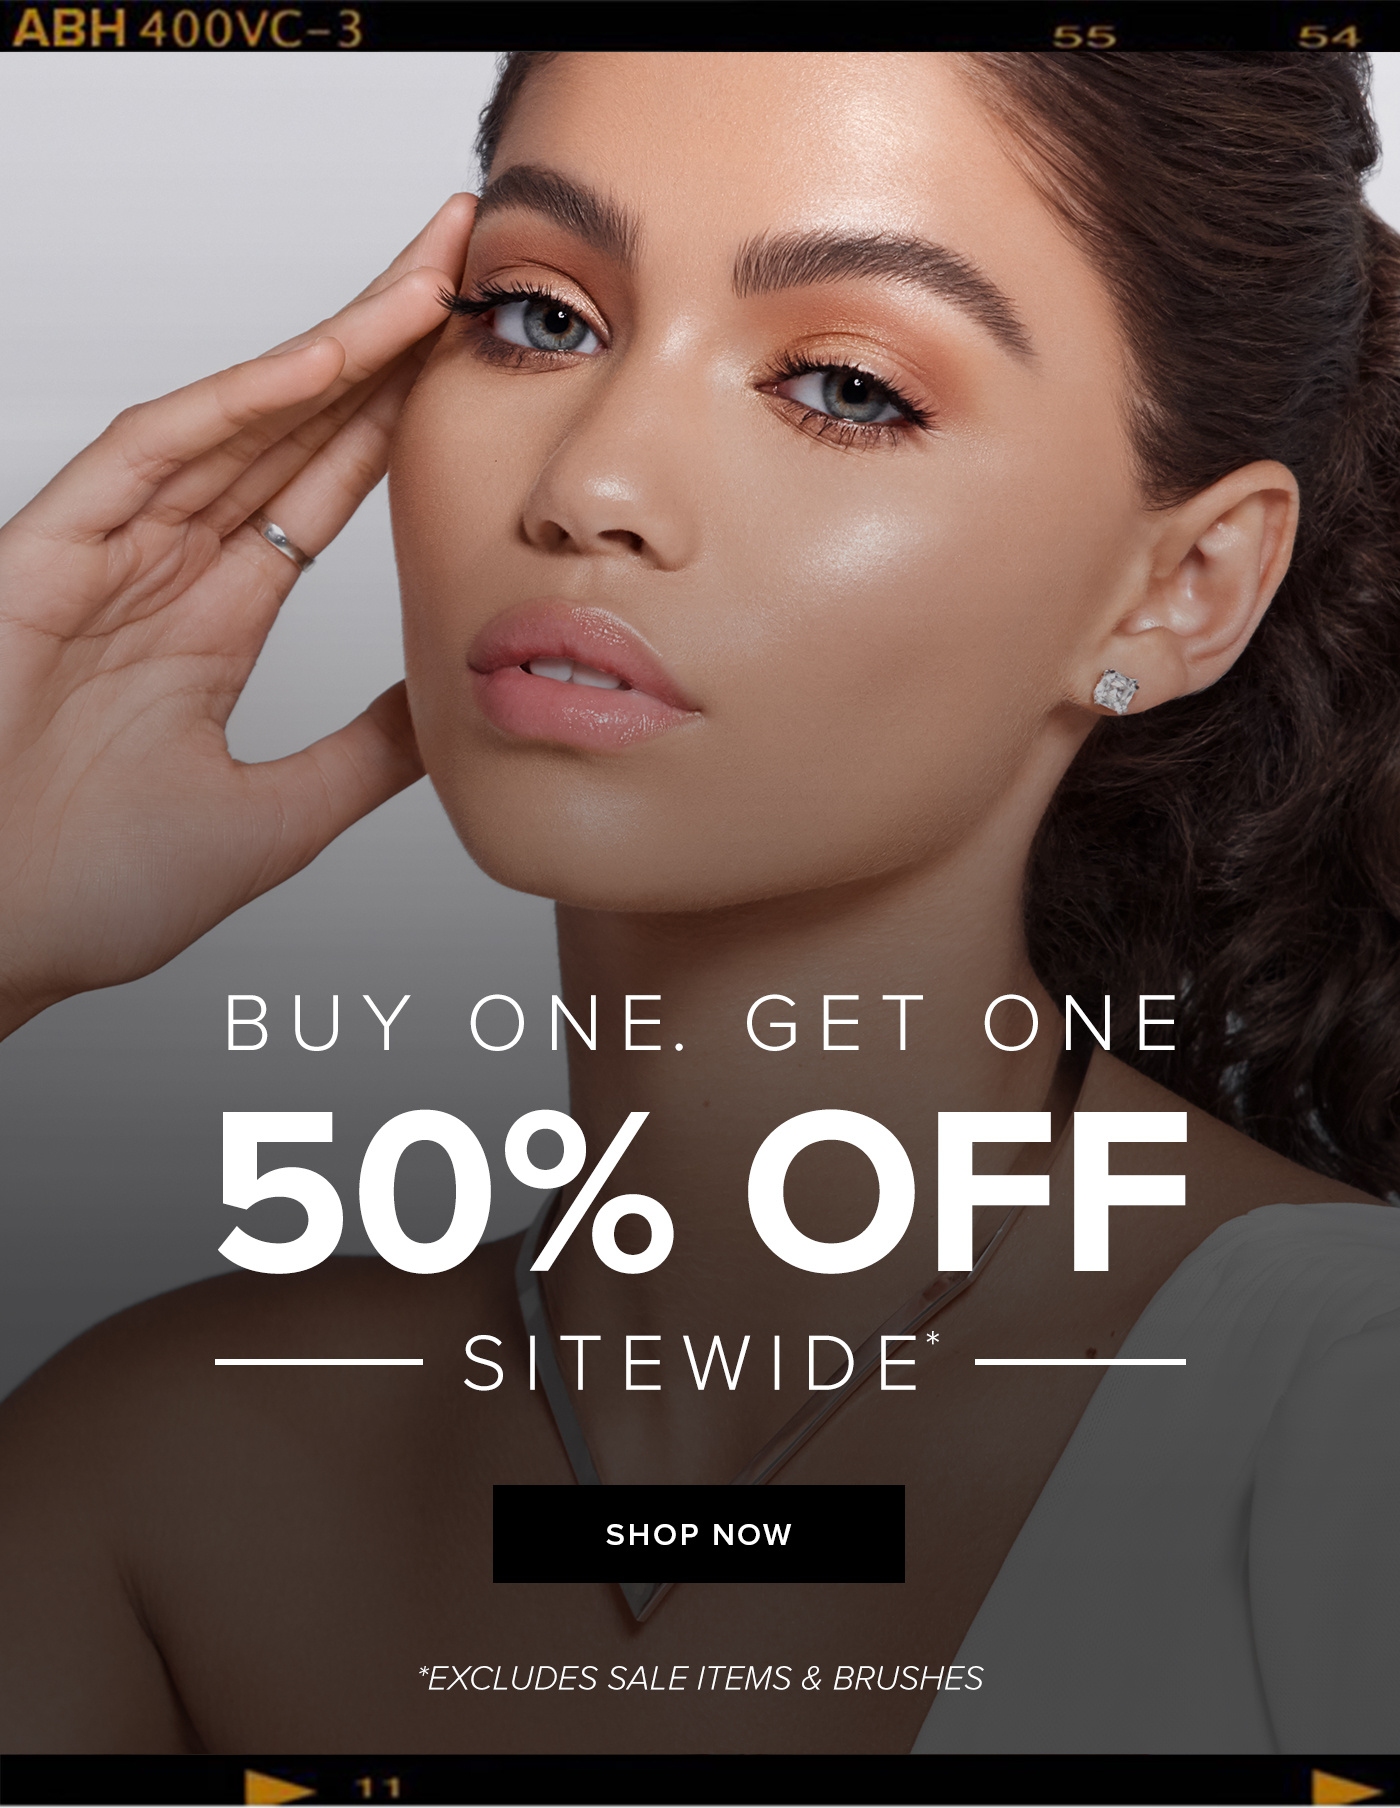 BUY ONE. GET ONE 50% OFF SITEWIDE SHOP NOW *EXCLUDES SALE ITEMS & BRUSHES